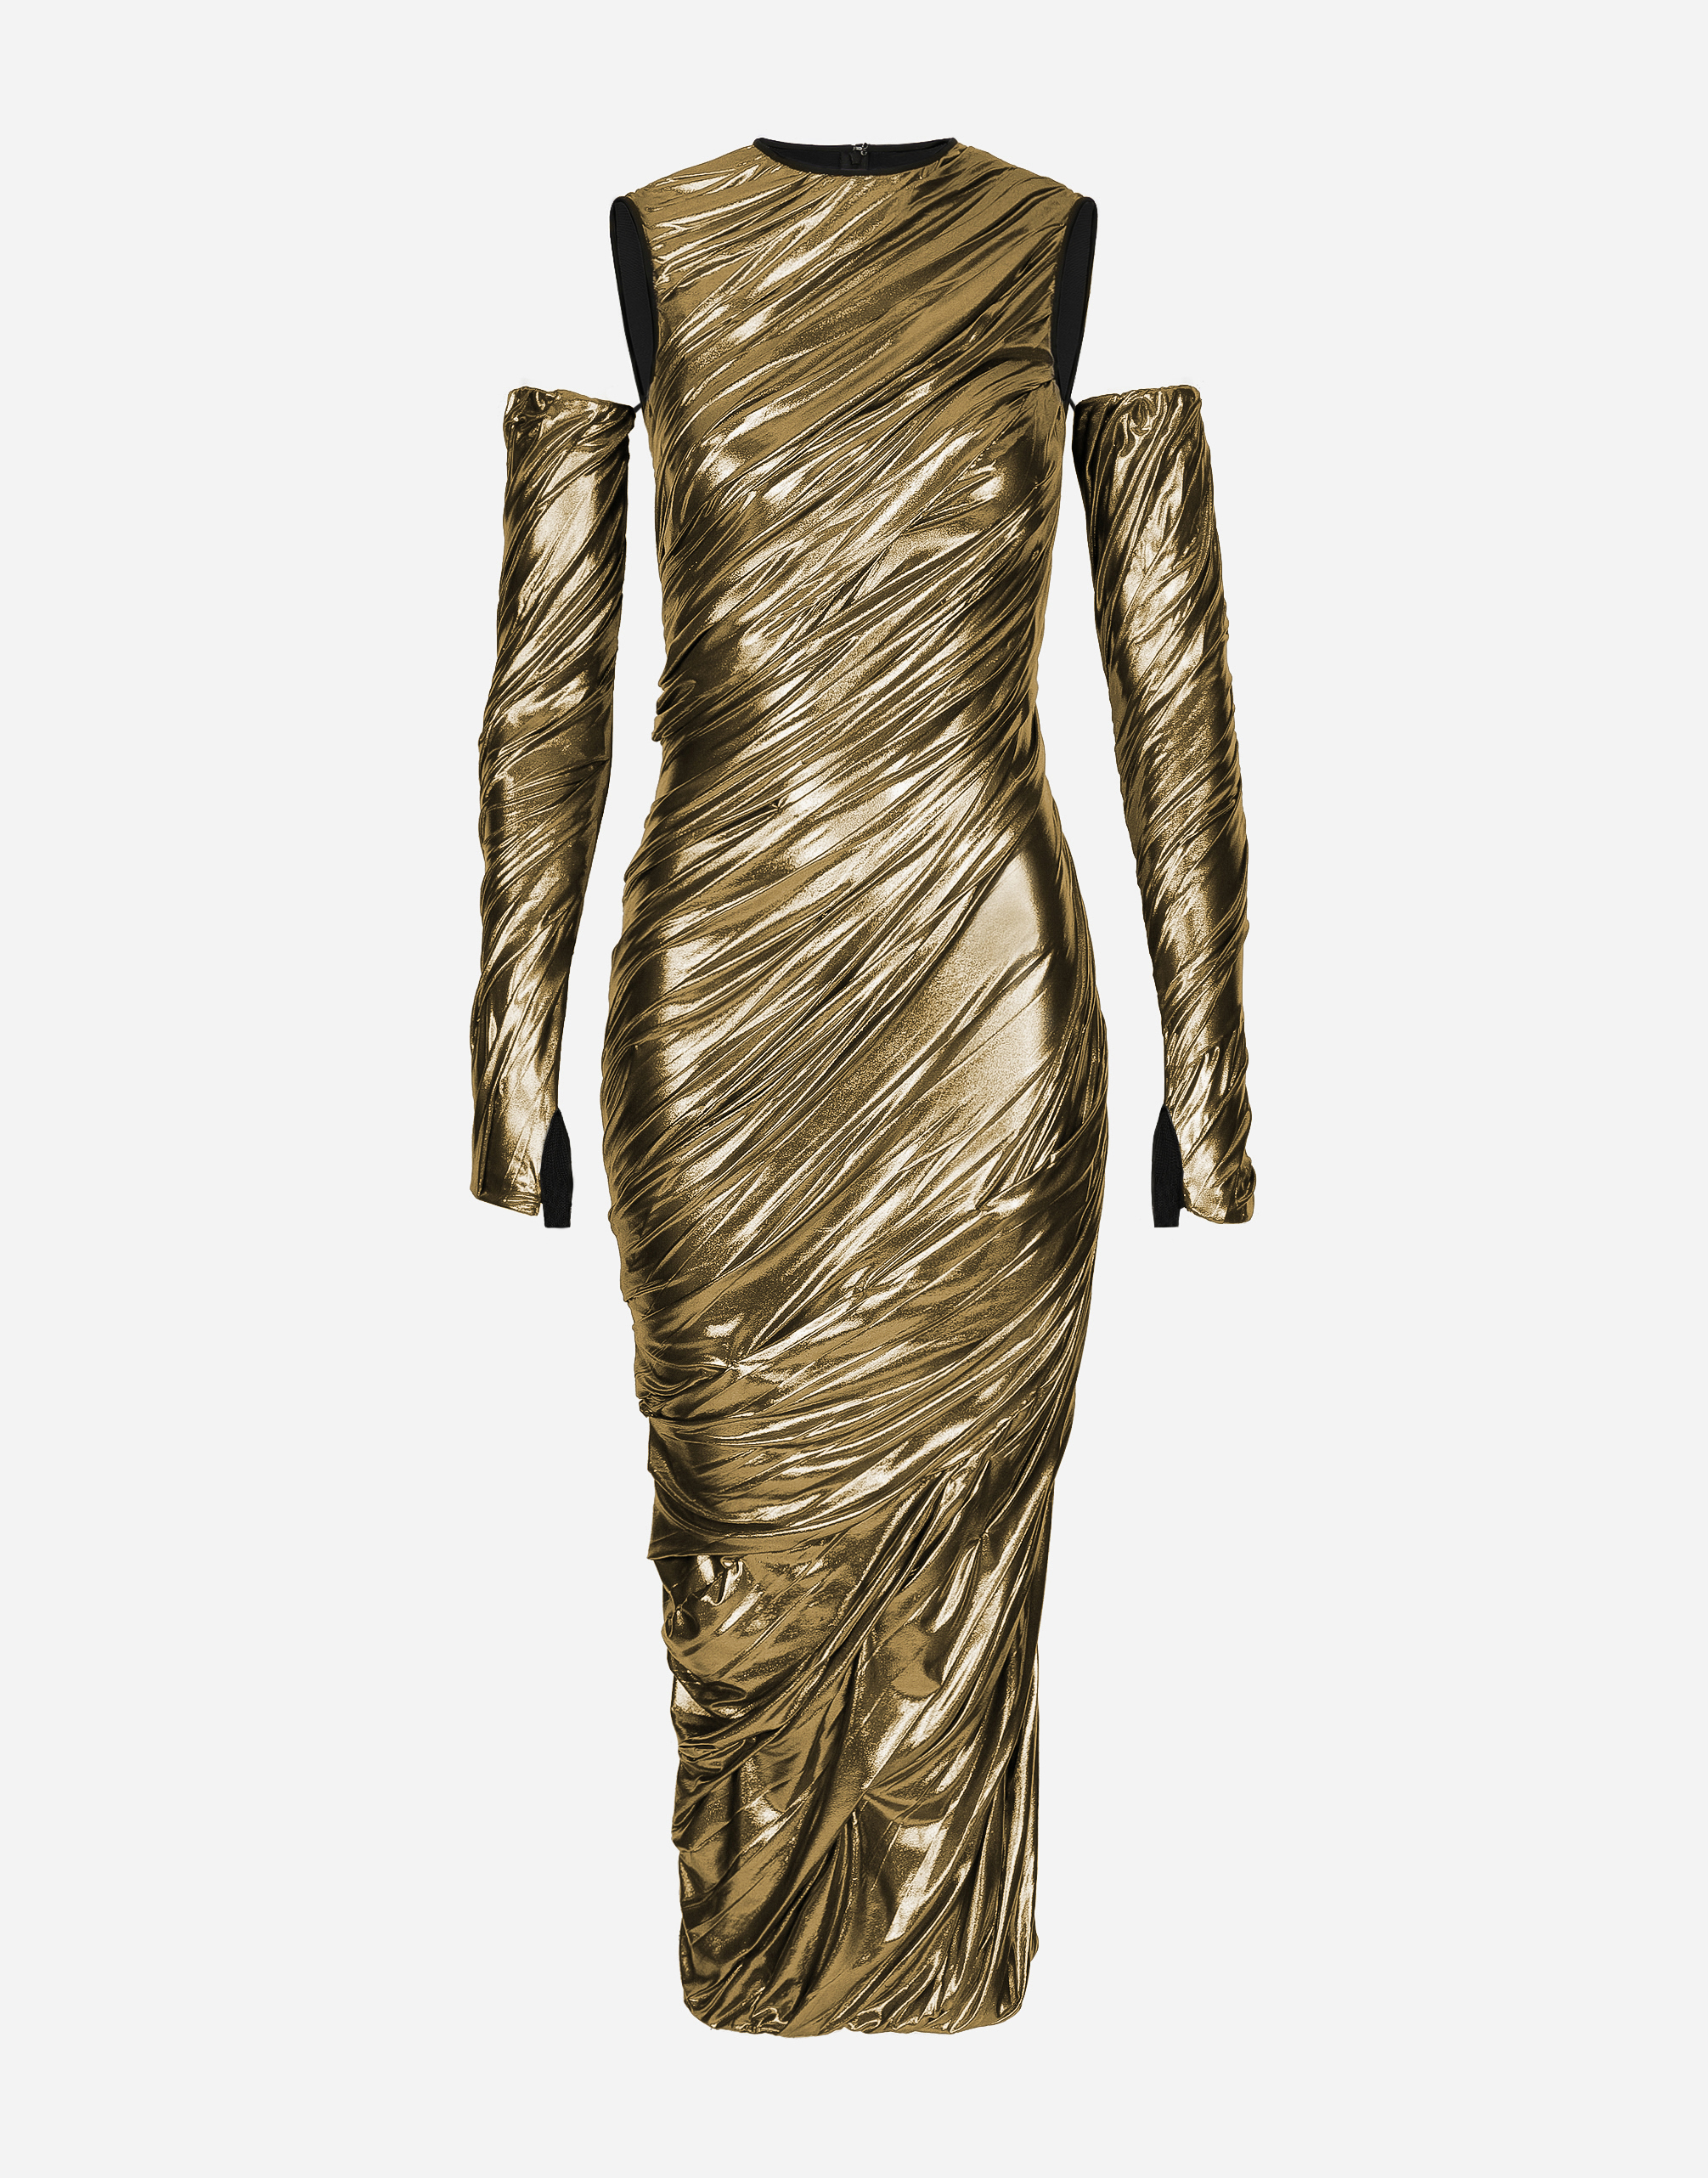 Foiled organzine calf-length dress with gloves in Gold for Women 